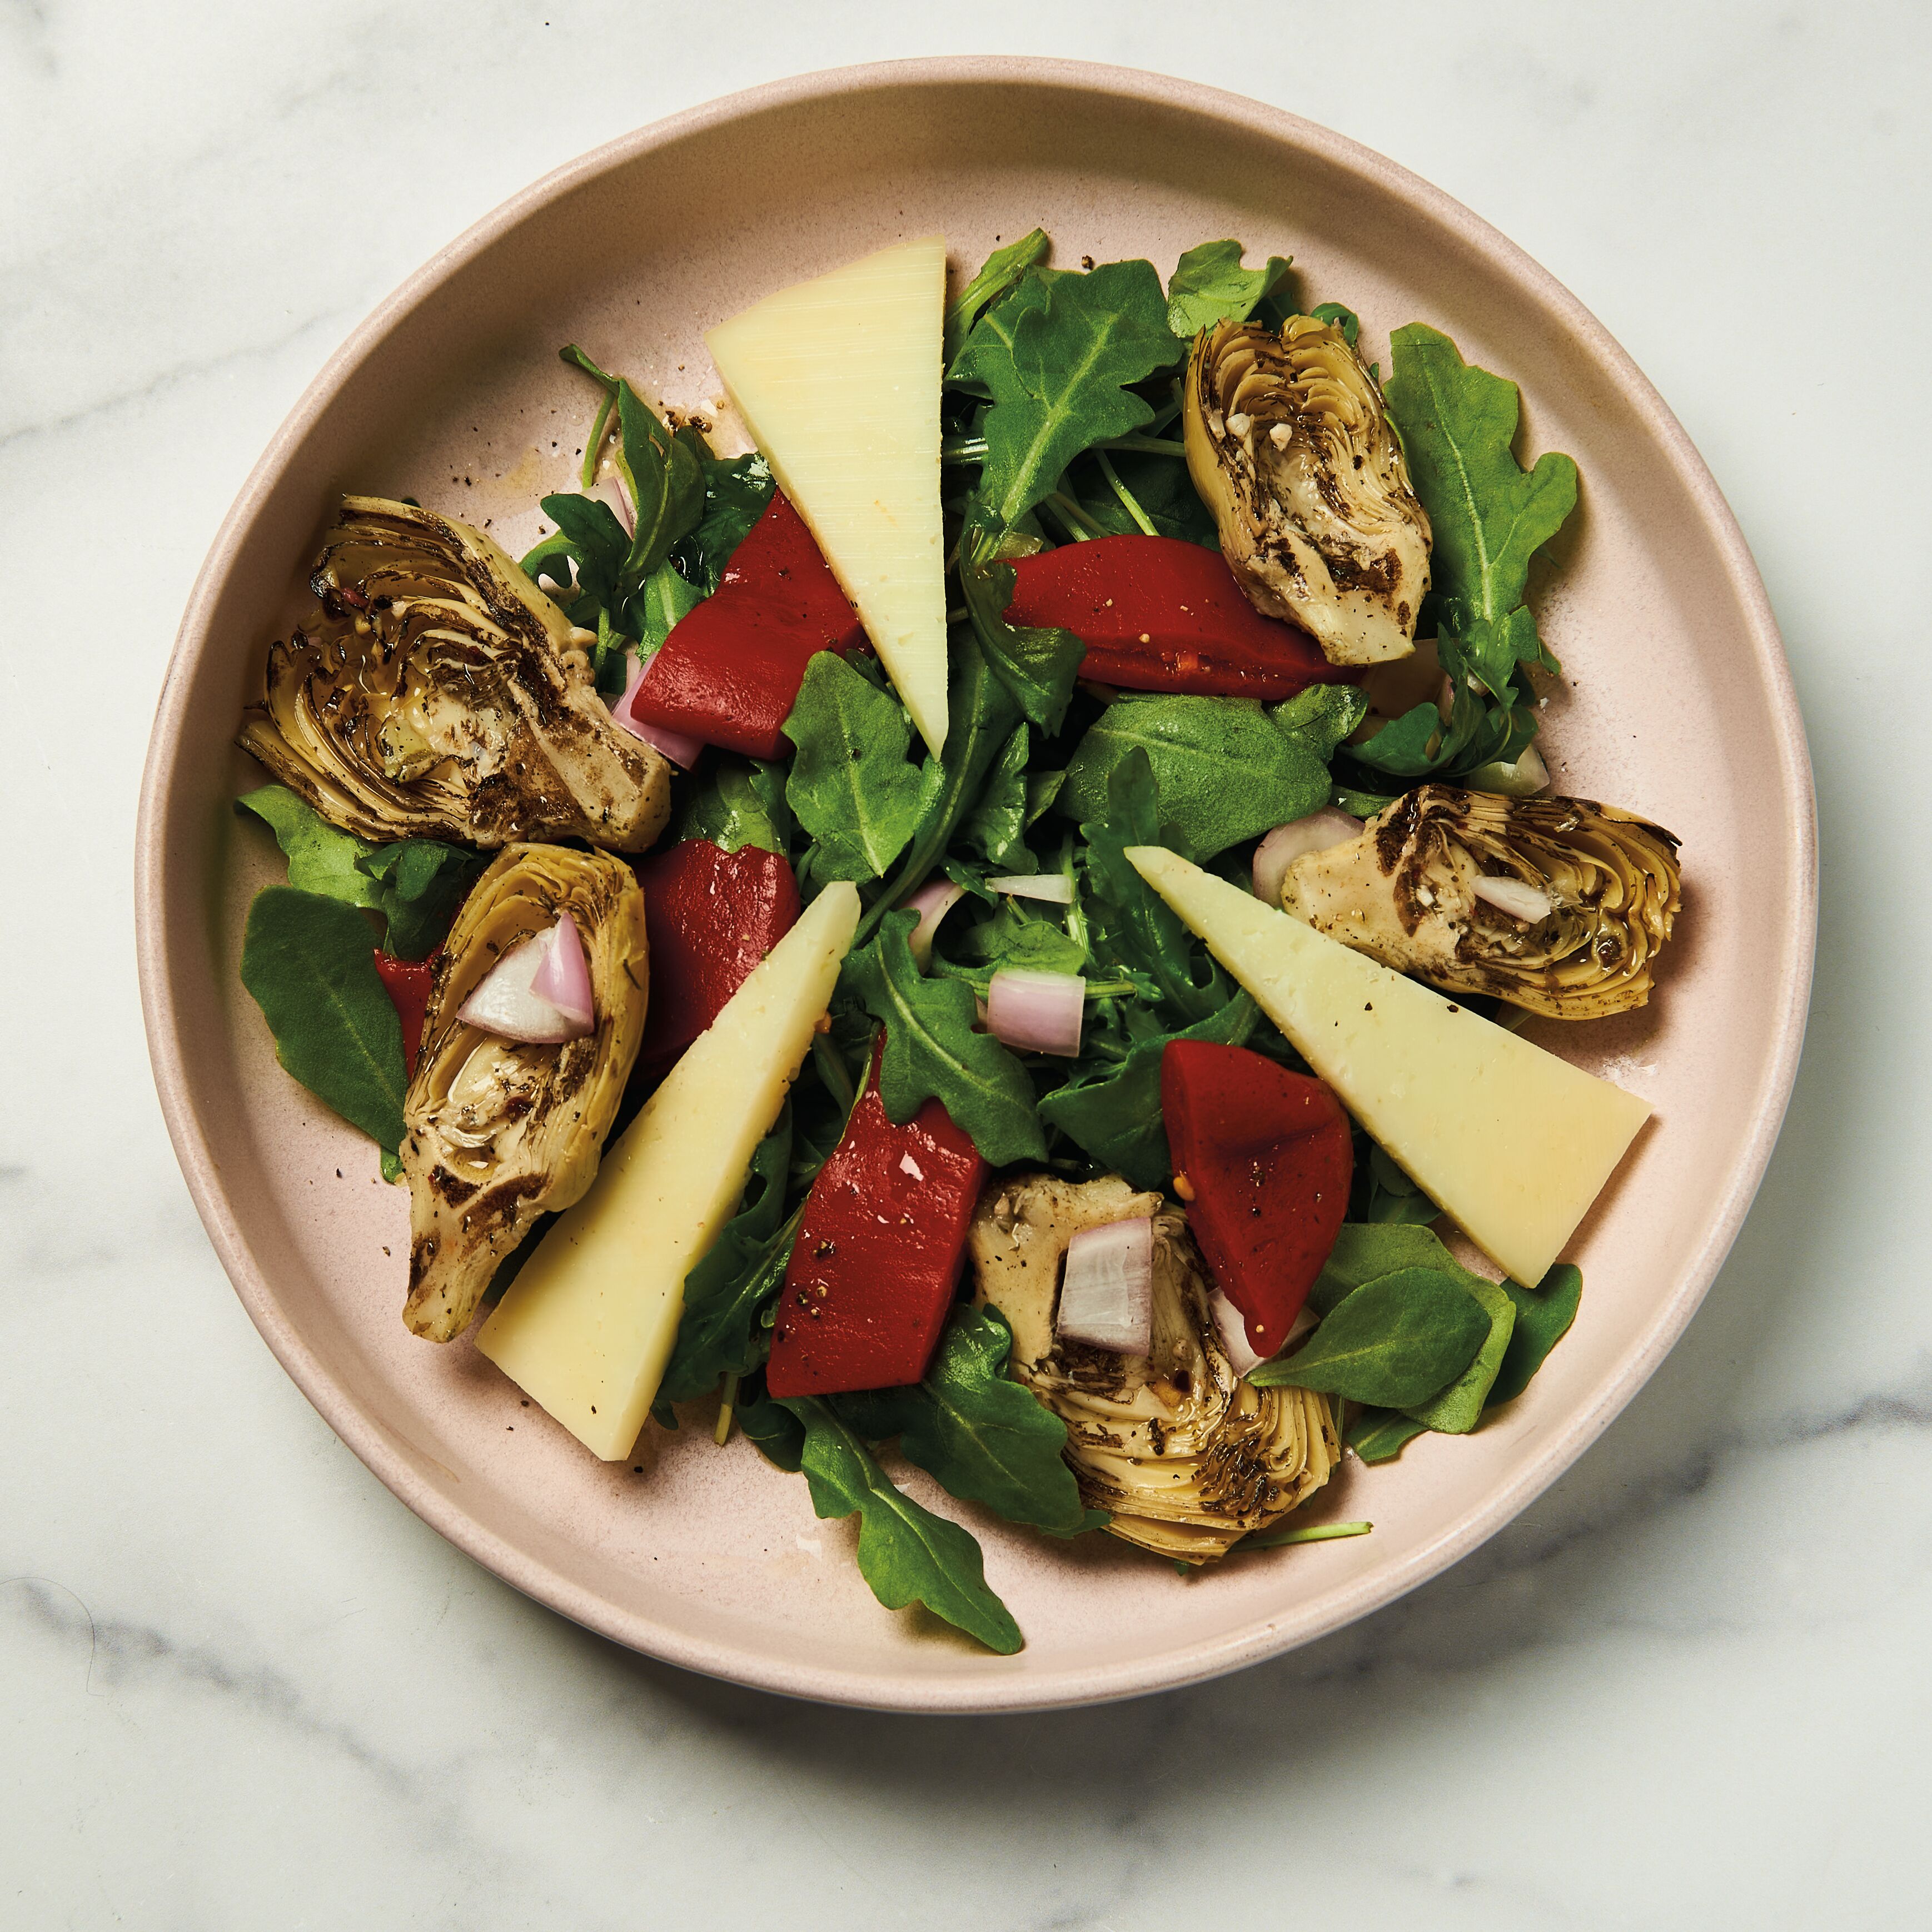 Arugula, roasted red piquillo peppers, grilled artichoke halves, manchego slices, and shallots arranged on a salad plate